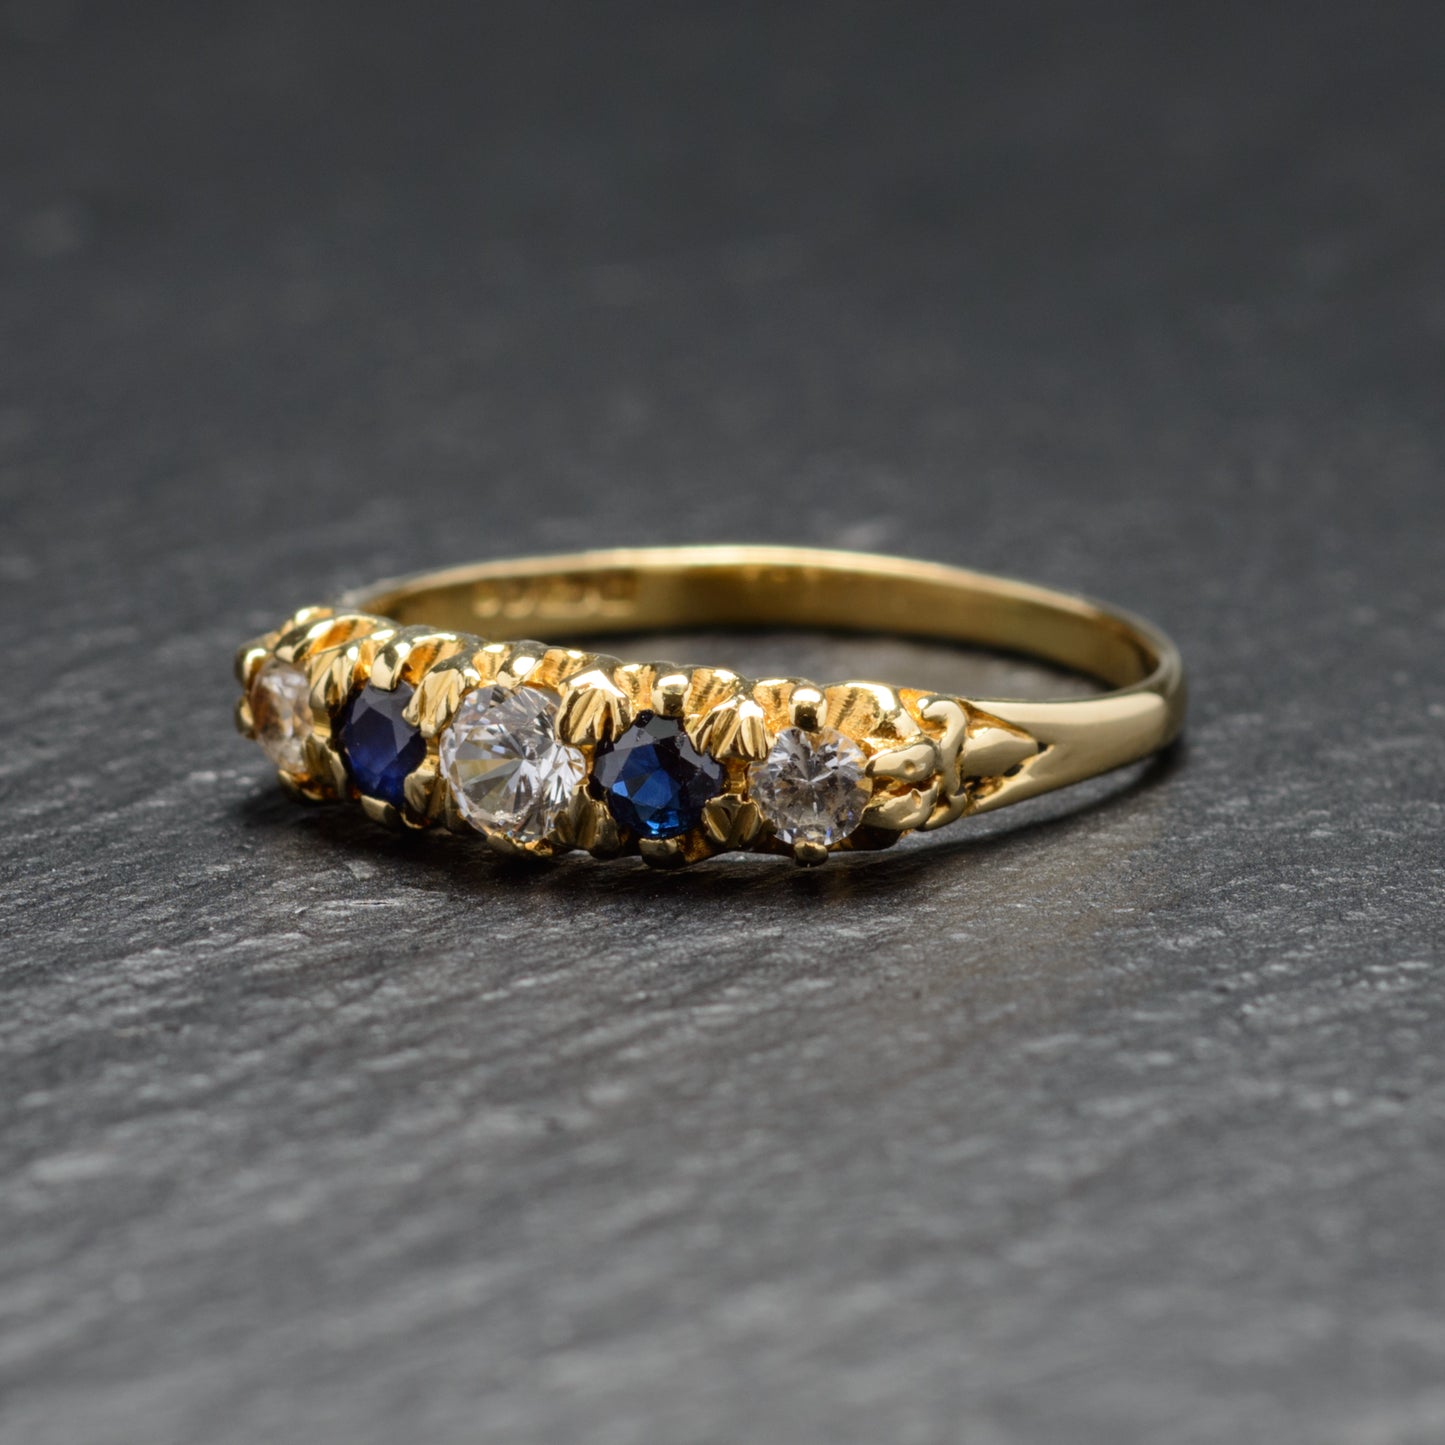 Vintage 18ct Gold Ring With Sapphire & White Spinel Gemstones H'mark London 1982 (A744)